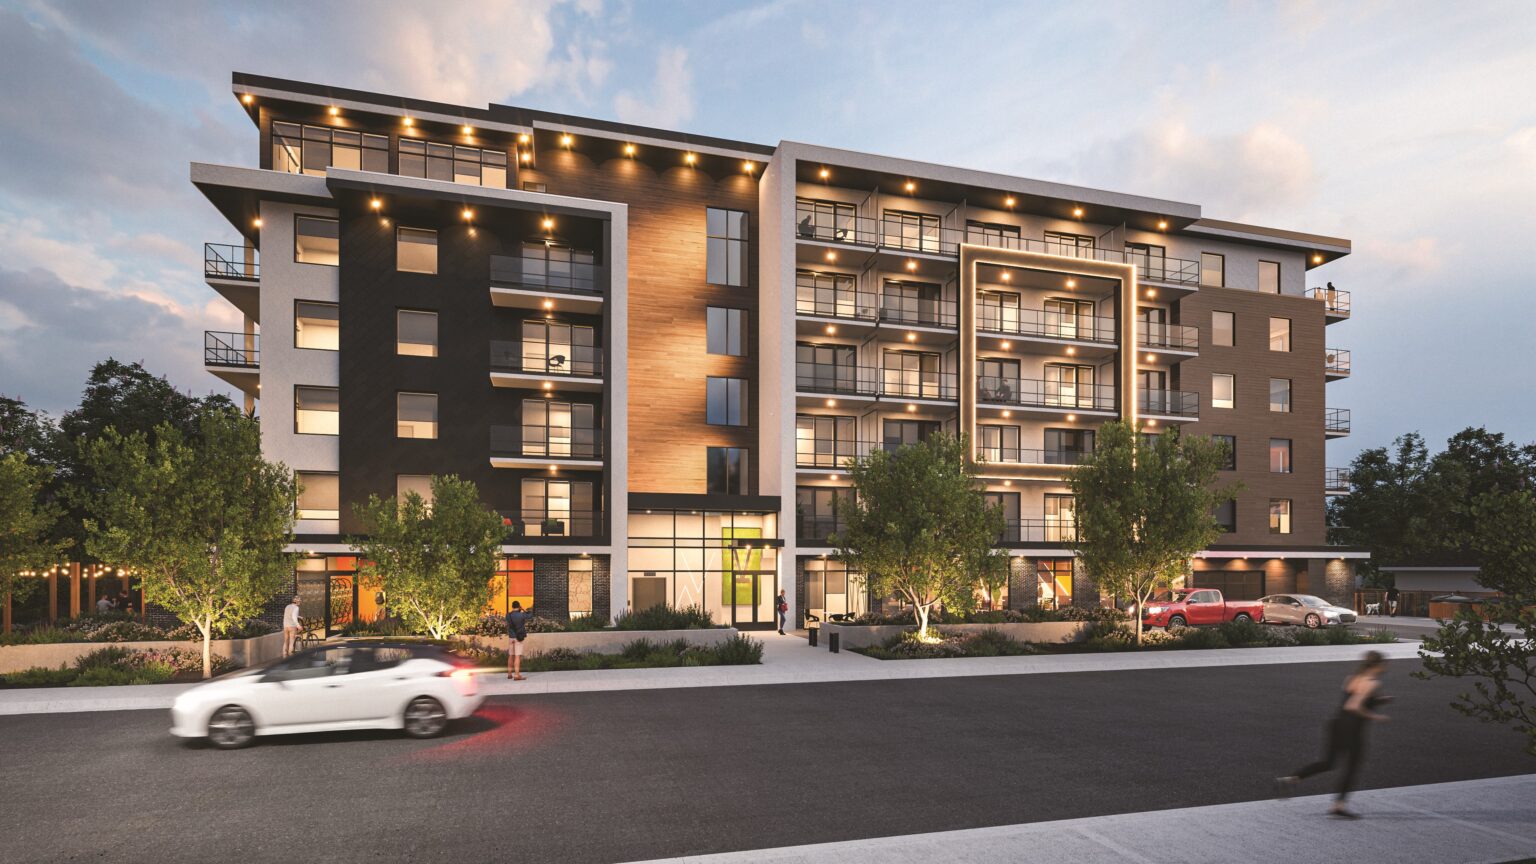 A collection of 206 studio, and 1- and 2-bedroom suites coming soon to Kelowna.